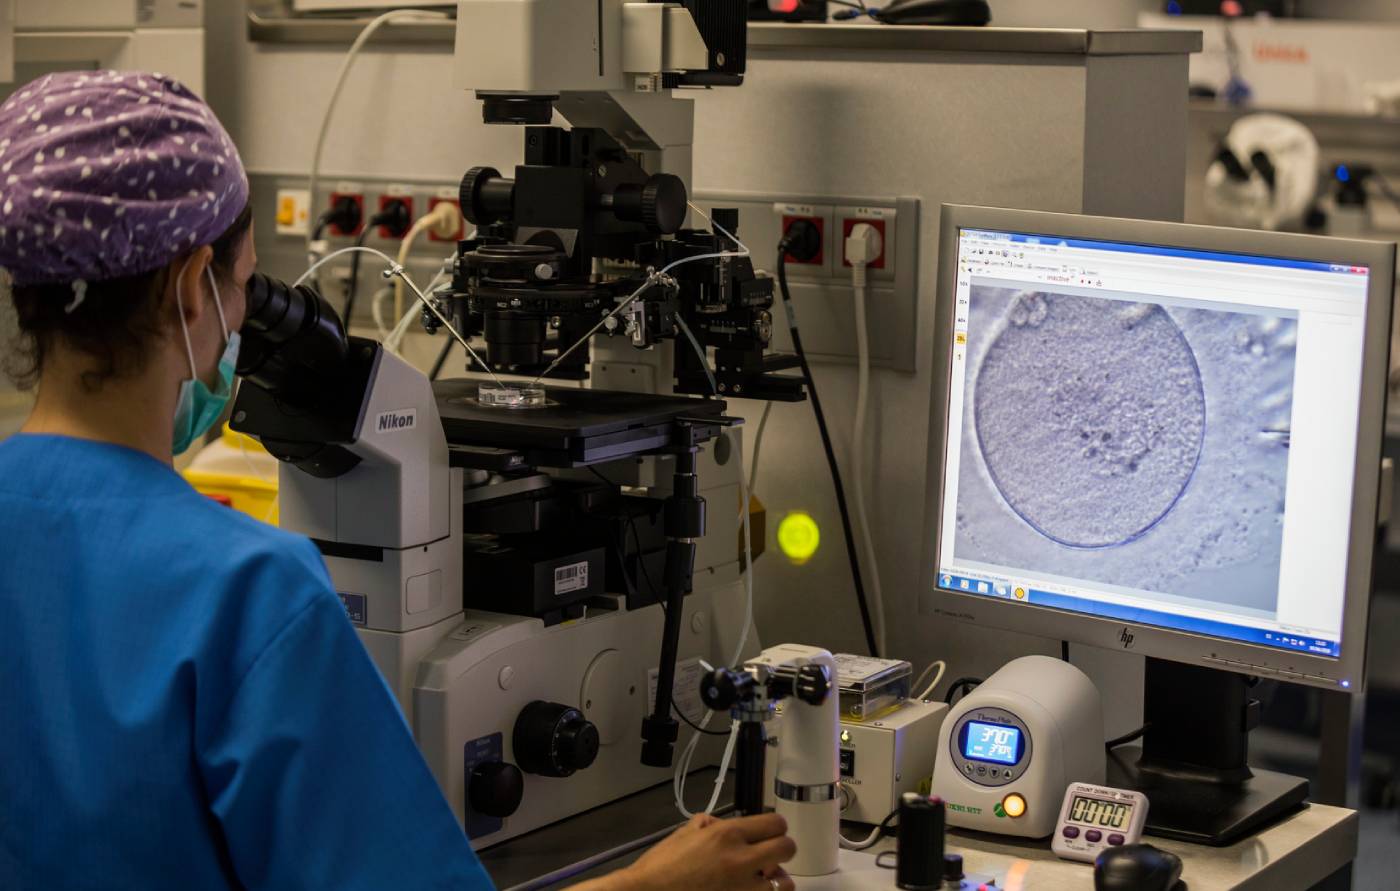 What’s the difference between ICSI and IVF?